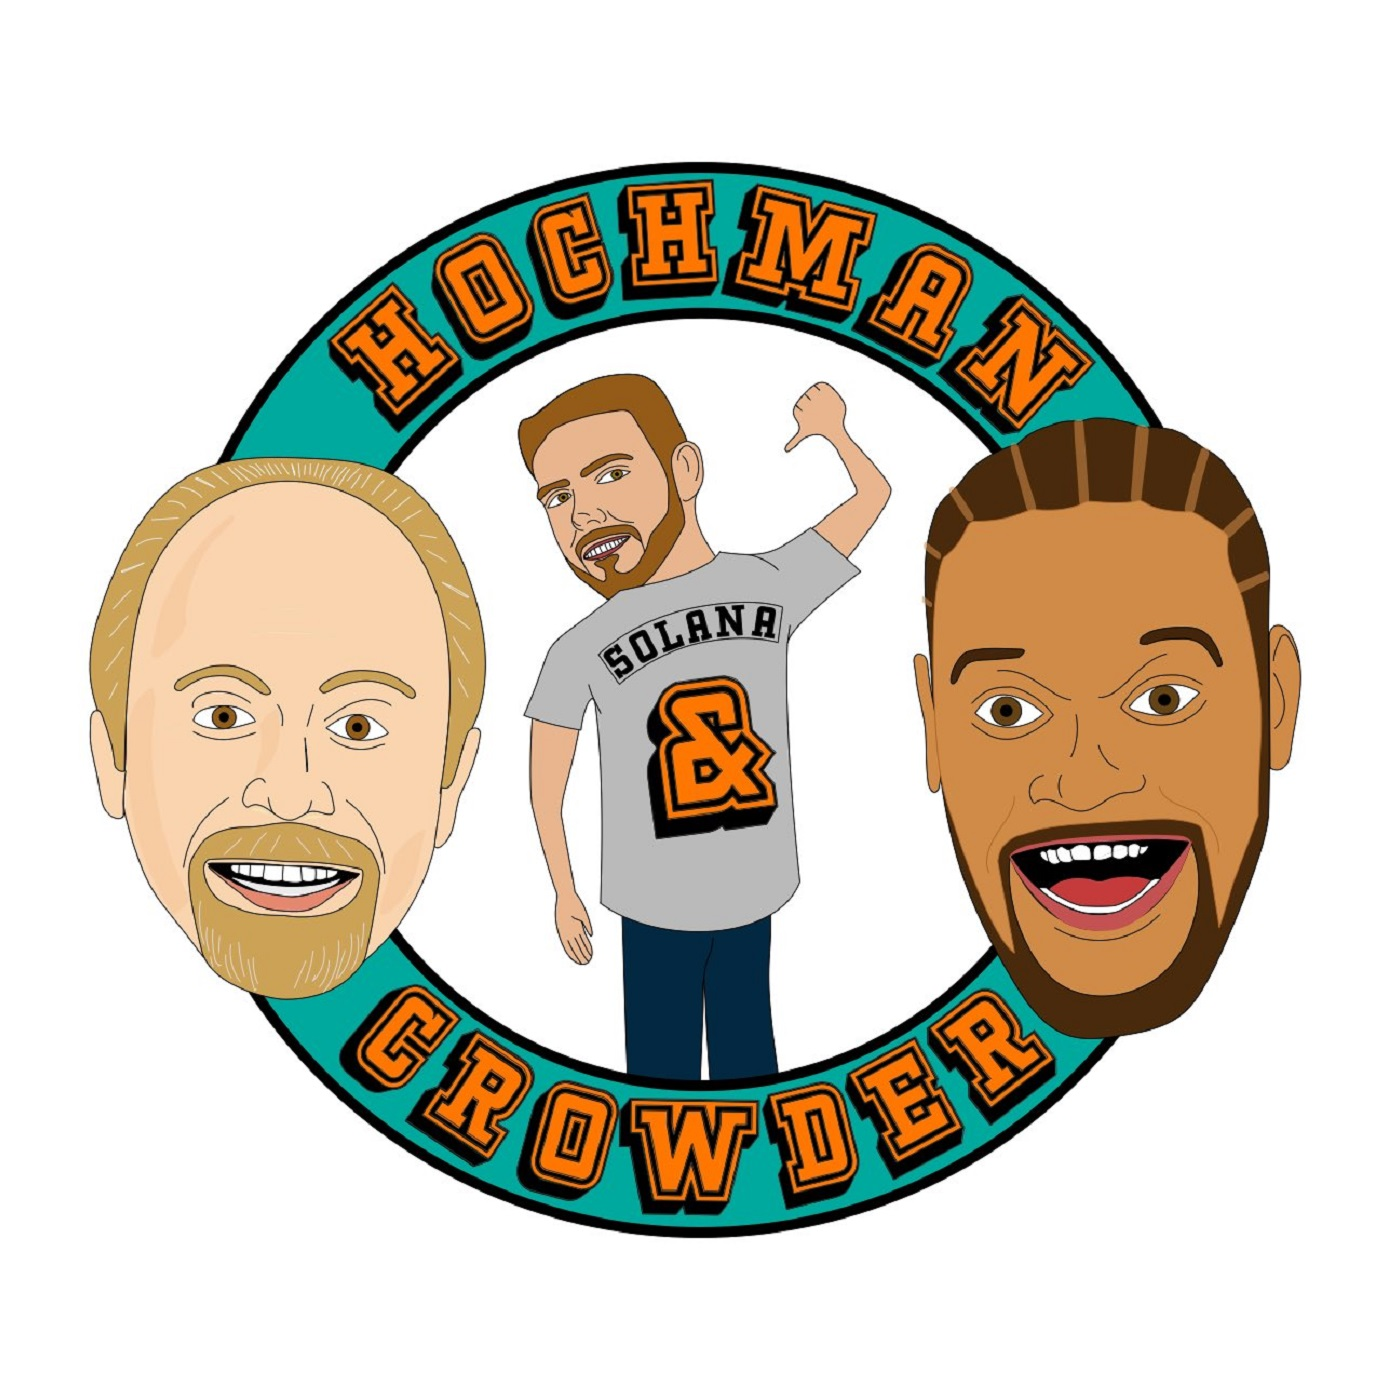 11-07-2019 - Hoch and Crowder Podcast Hour 3